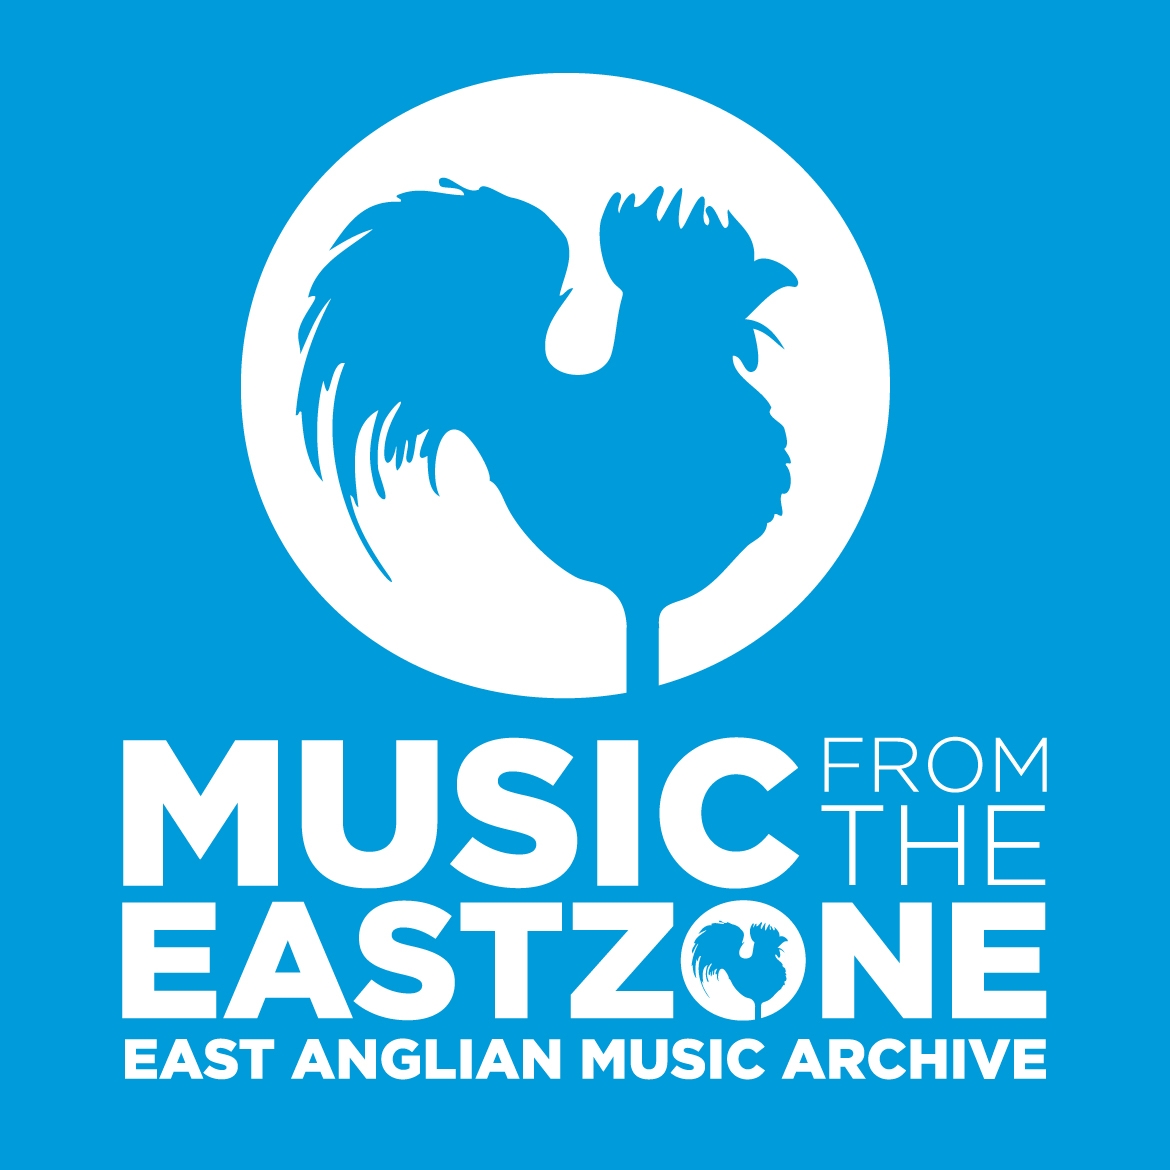 EAST ANGLIAN MUSIC ARCHIVE